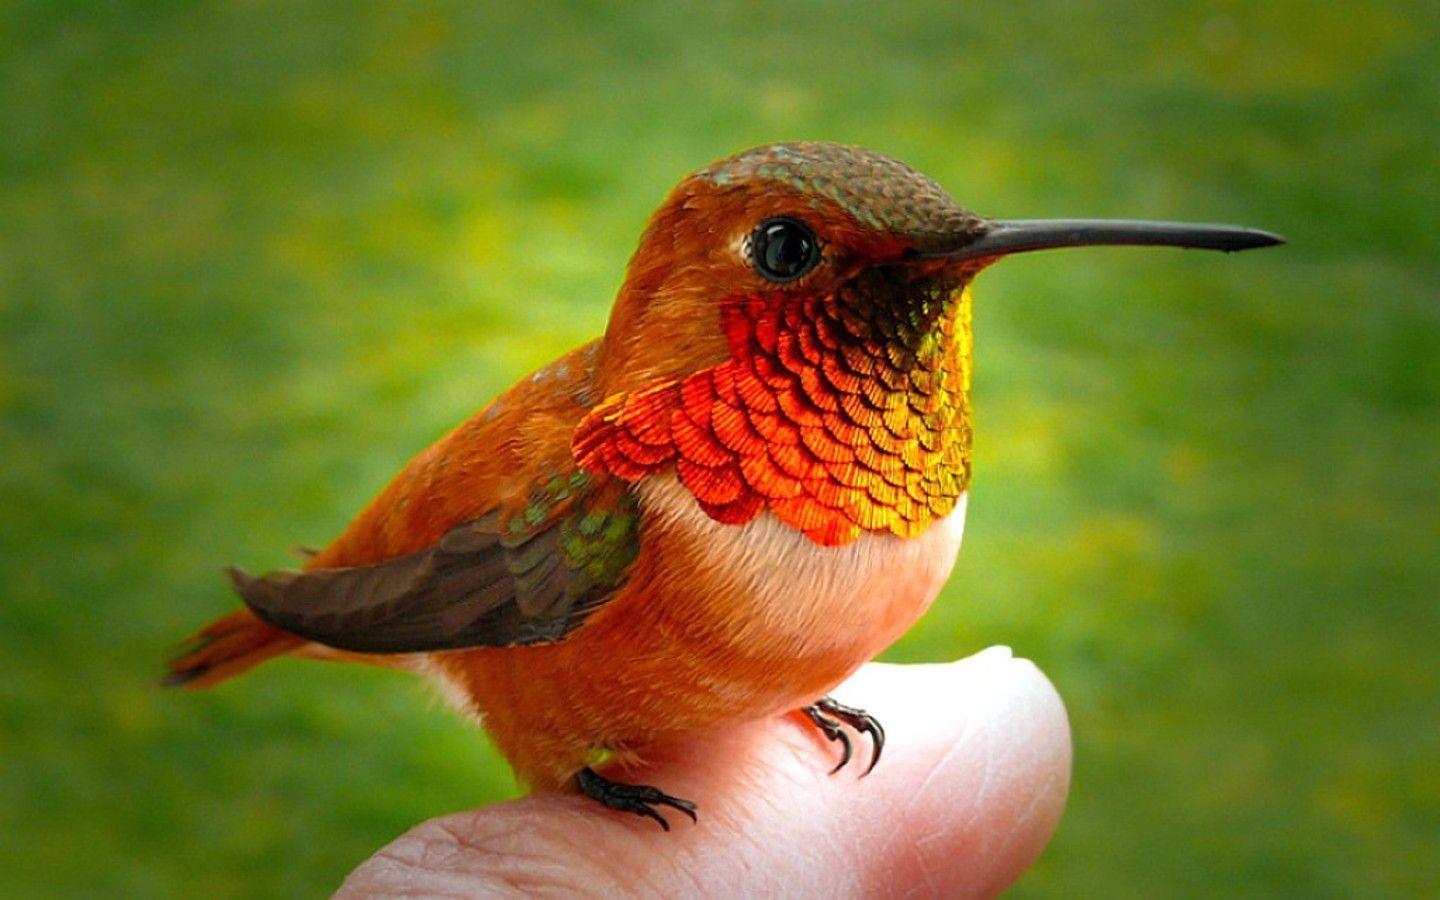 Hummingbird Finger Wallpaper picture photo in best quality